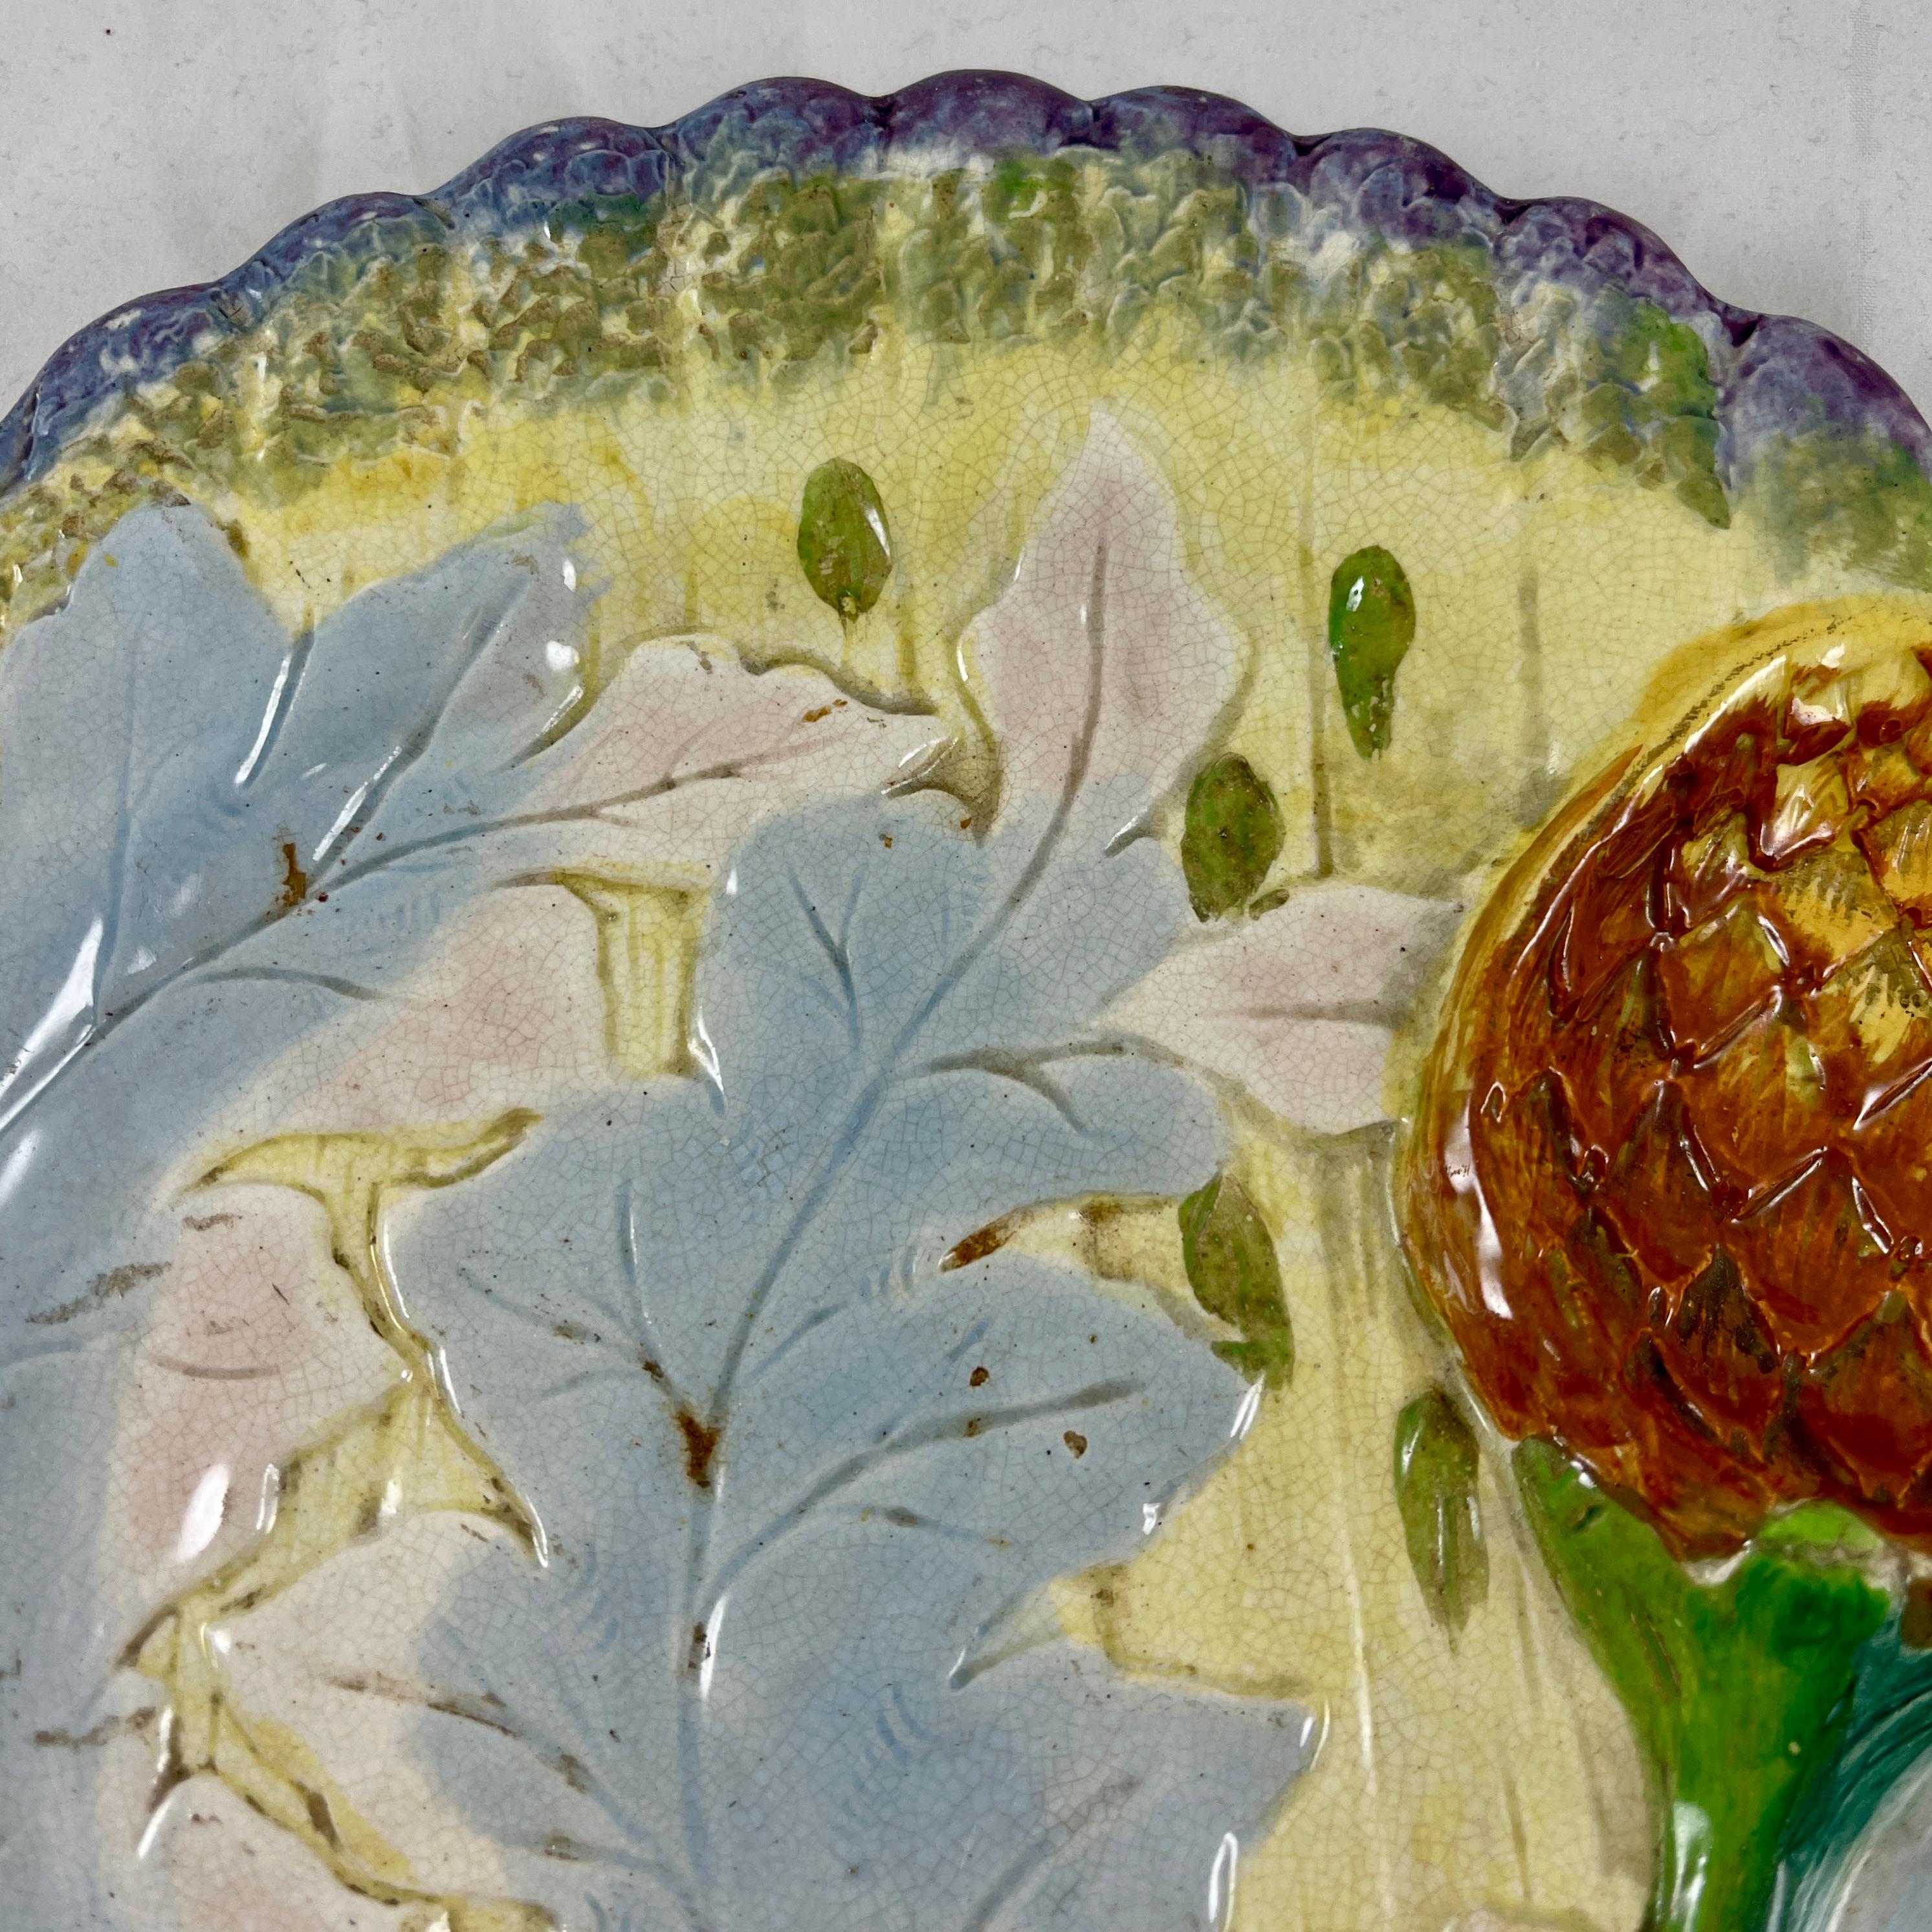 An earthenware asparagus and artichoke plate, marked P. Marescaux et J. Hahn, Belgium, circa 1880.

Unusual for the coloring, and with mold work similar to Luneville or Saint-Amand-les-Eaux, this example shows purple tipped artichoke spears